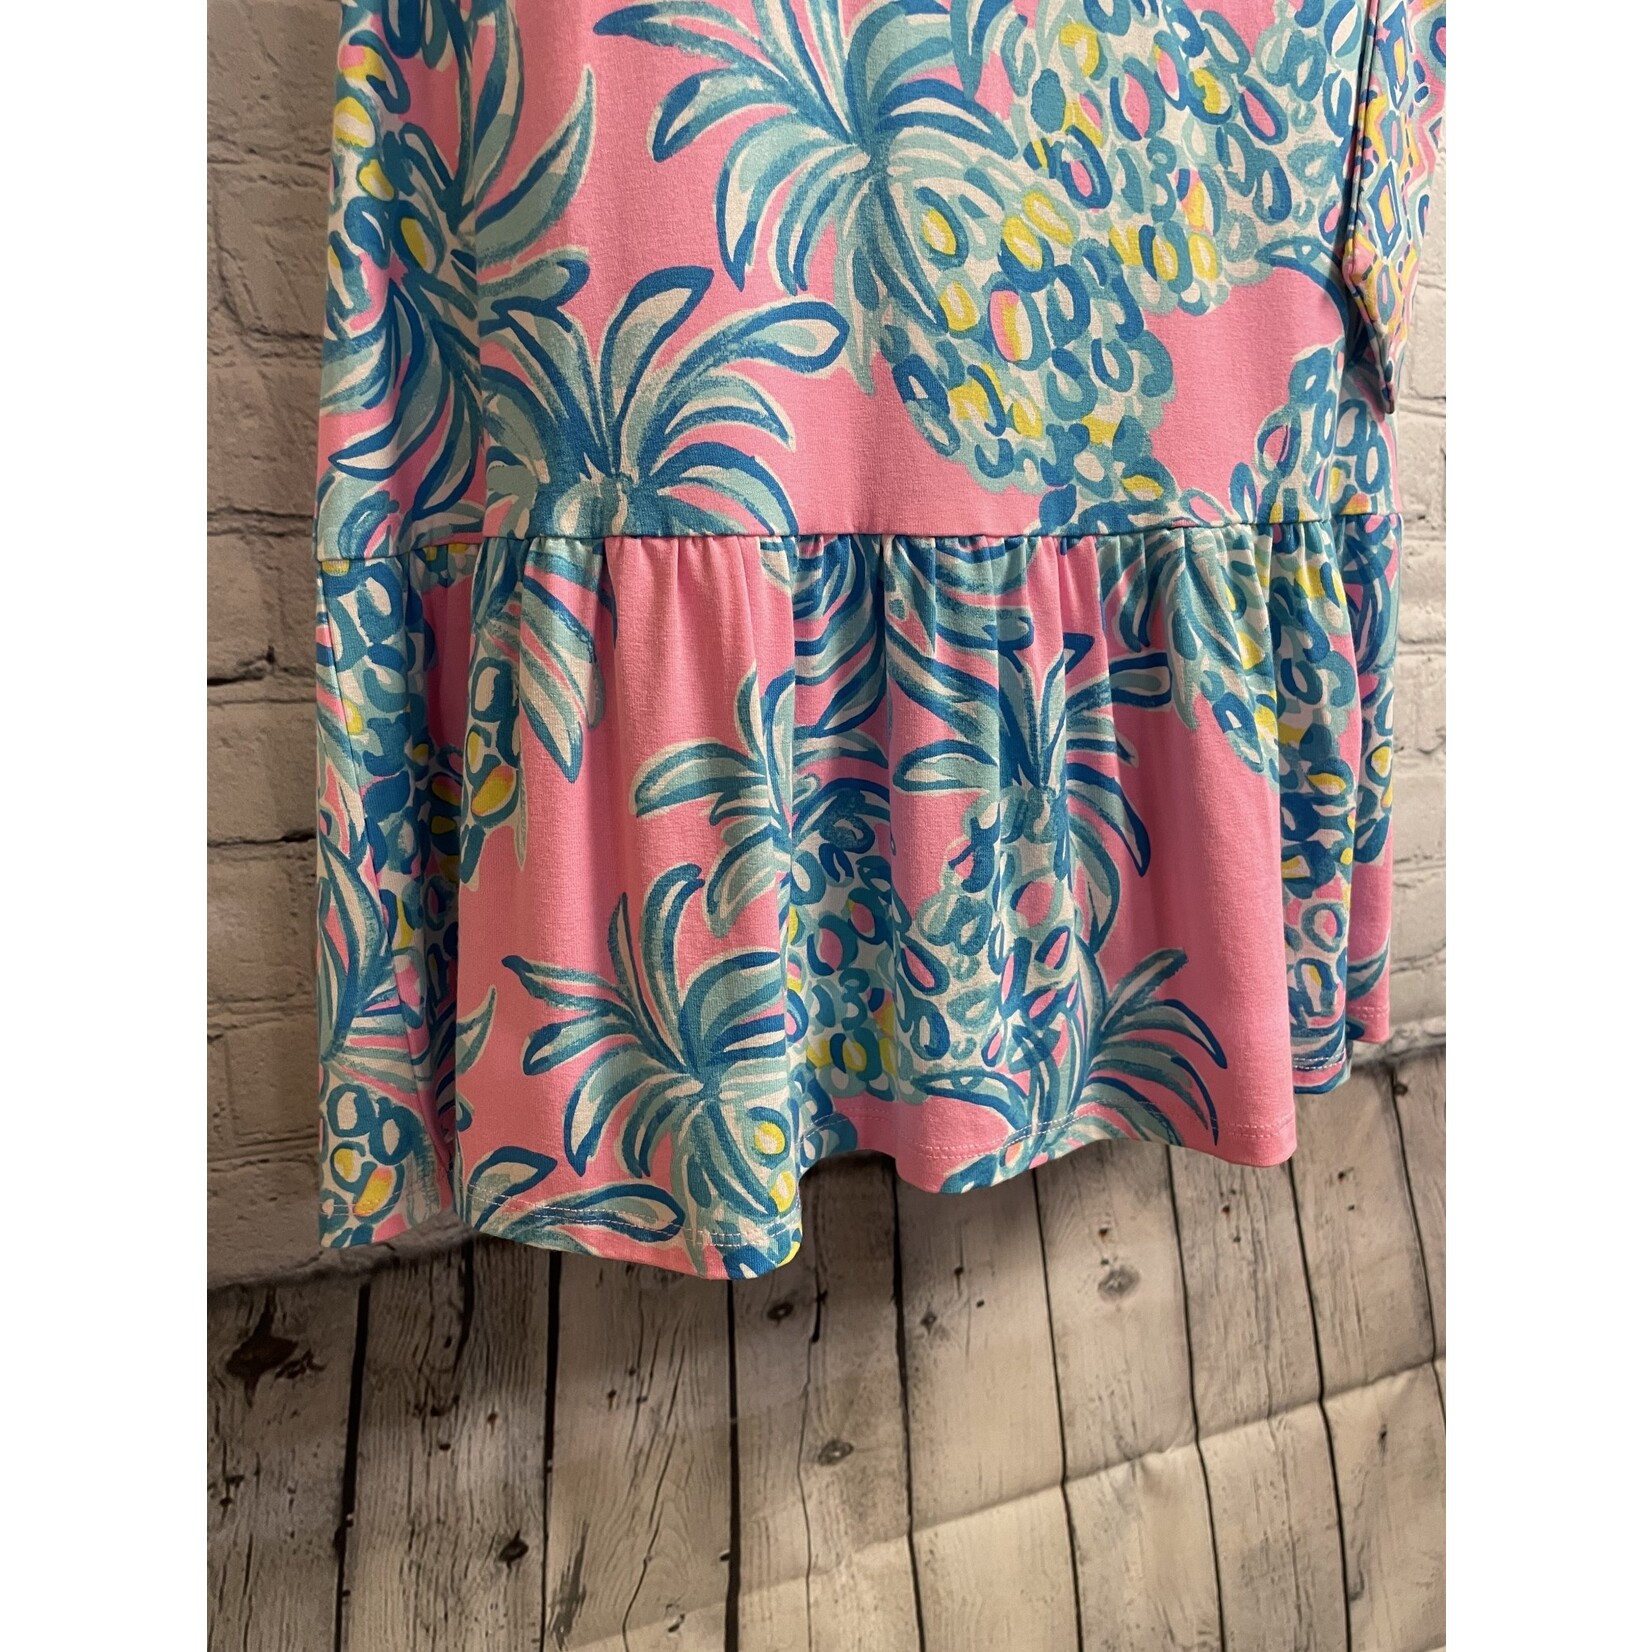 Lilly Pulitzer Lilly Pulitzer, Pelican Pink, Misha Wrap Dress, XS, MSRP $